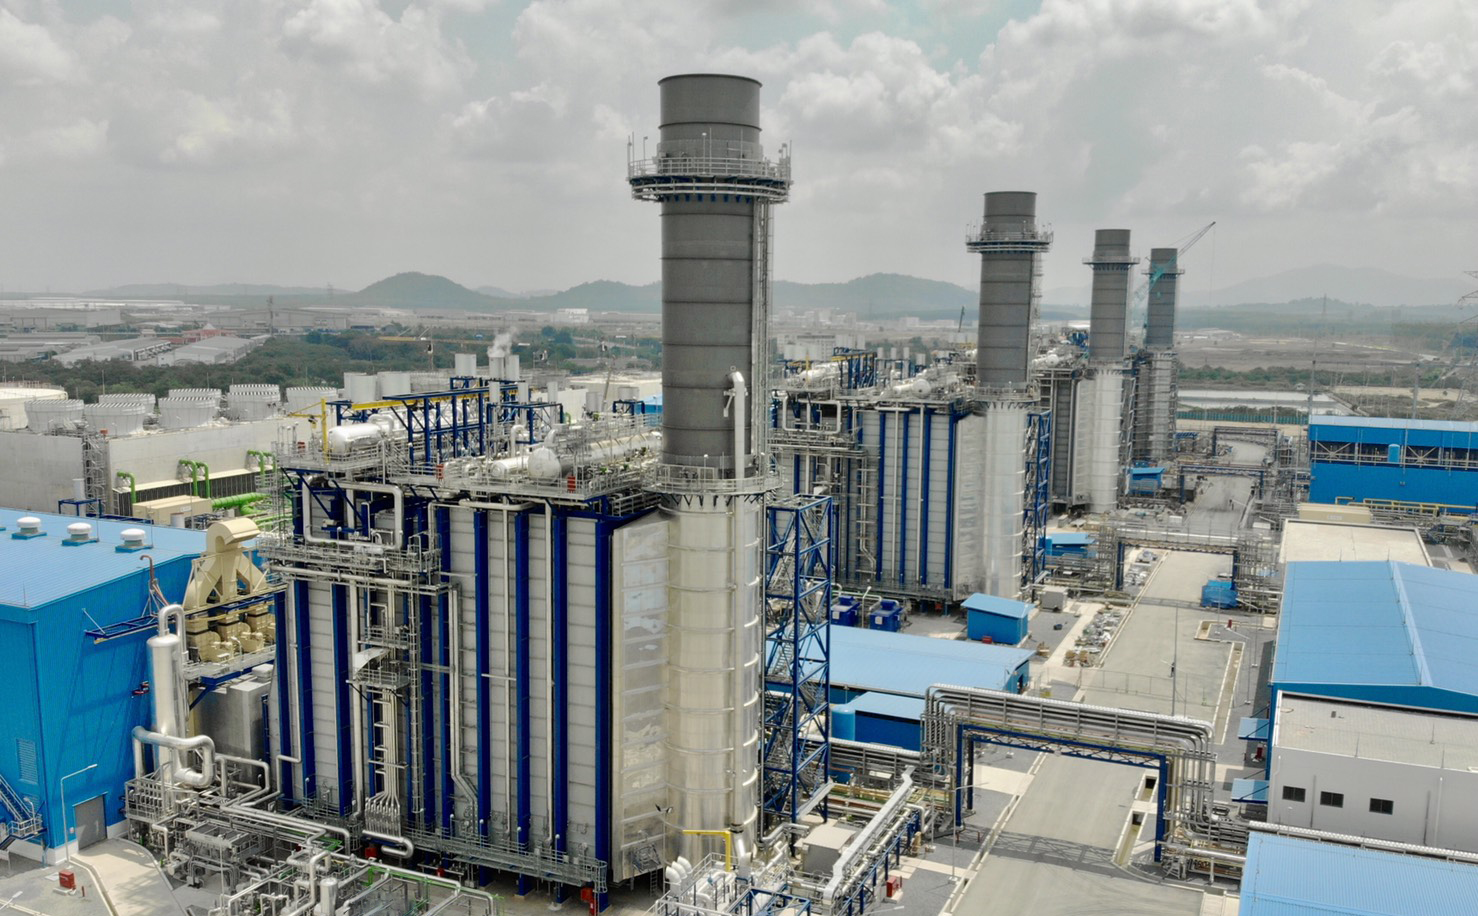 The First GTCC Power Plant in Chonburi